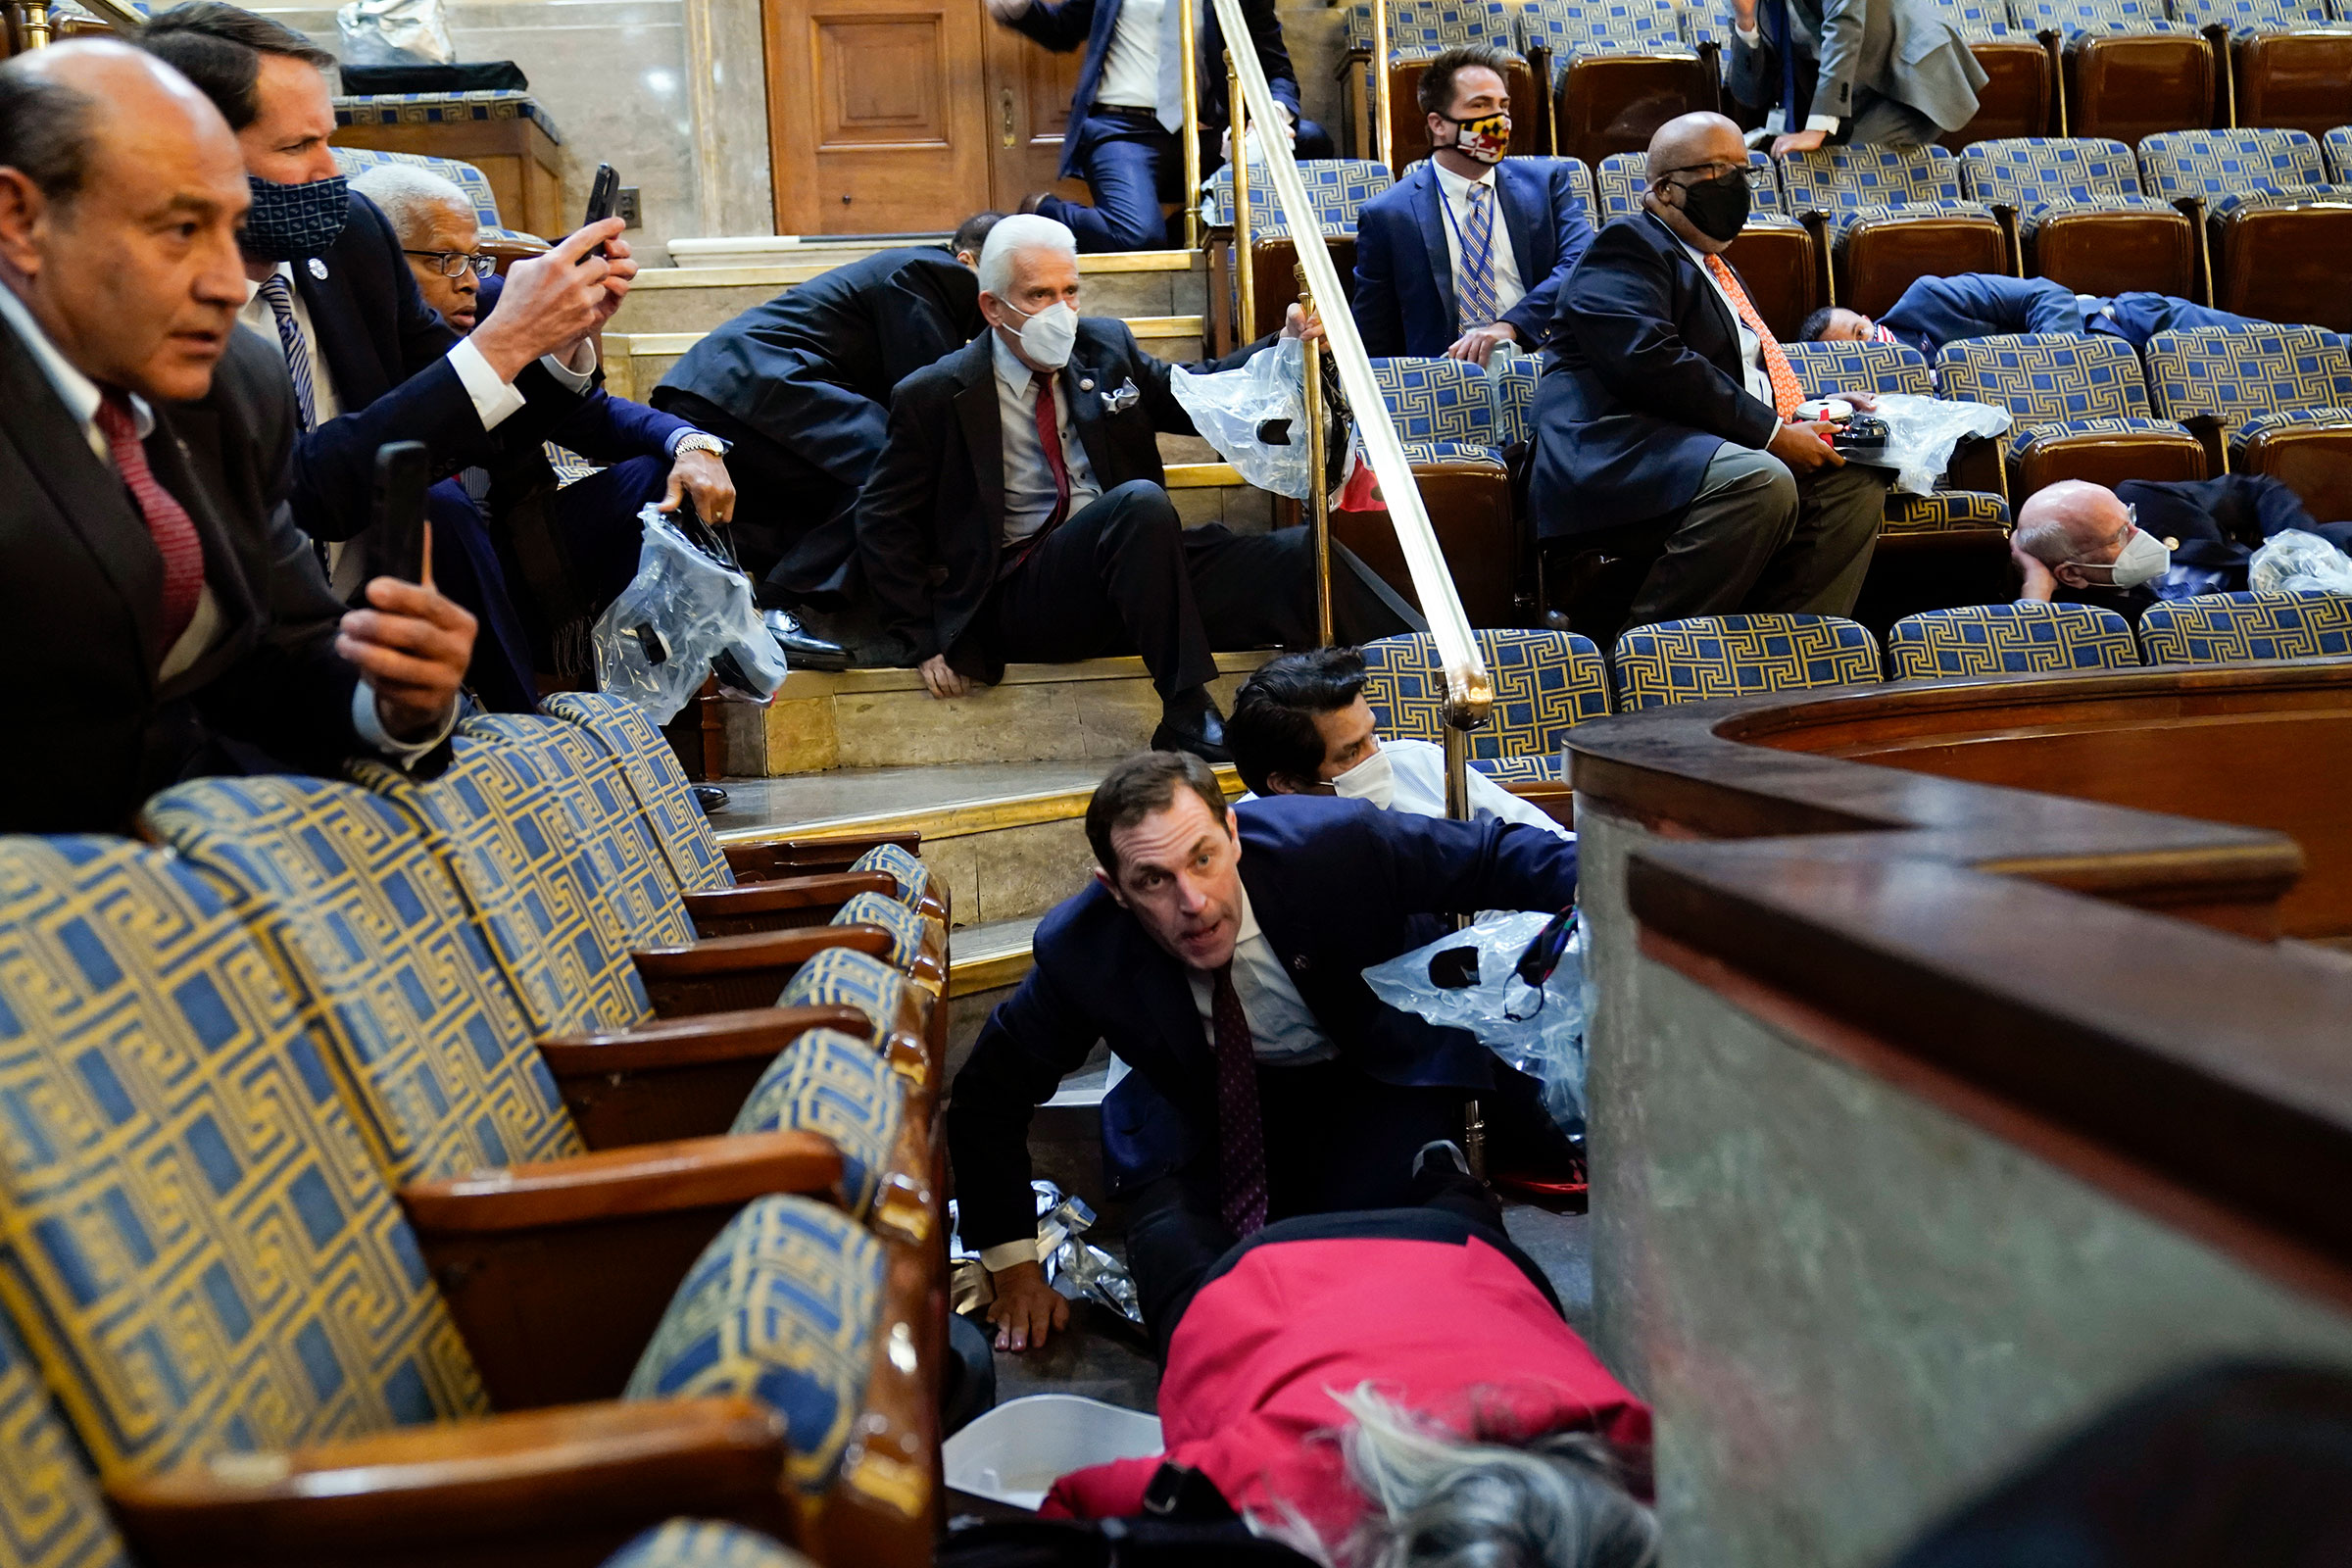 Lawmakers and staff shelter as protesters besiege the House Chamber. (Andrew Harnik—AP)